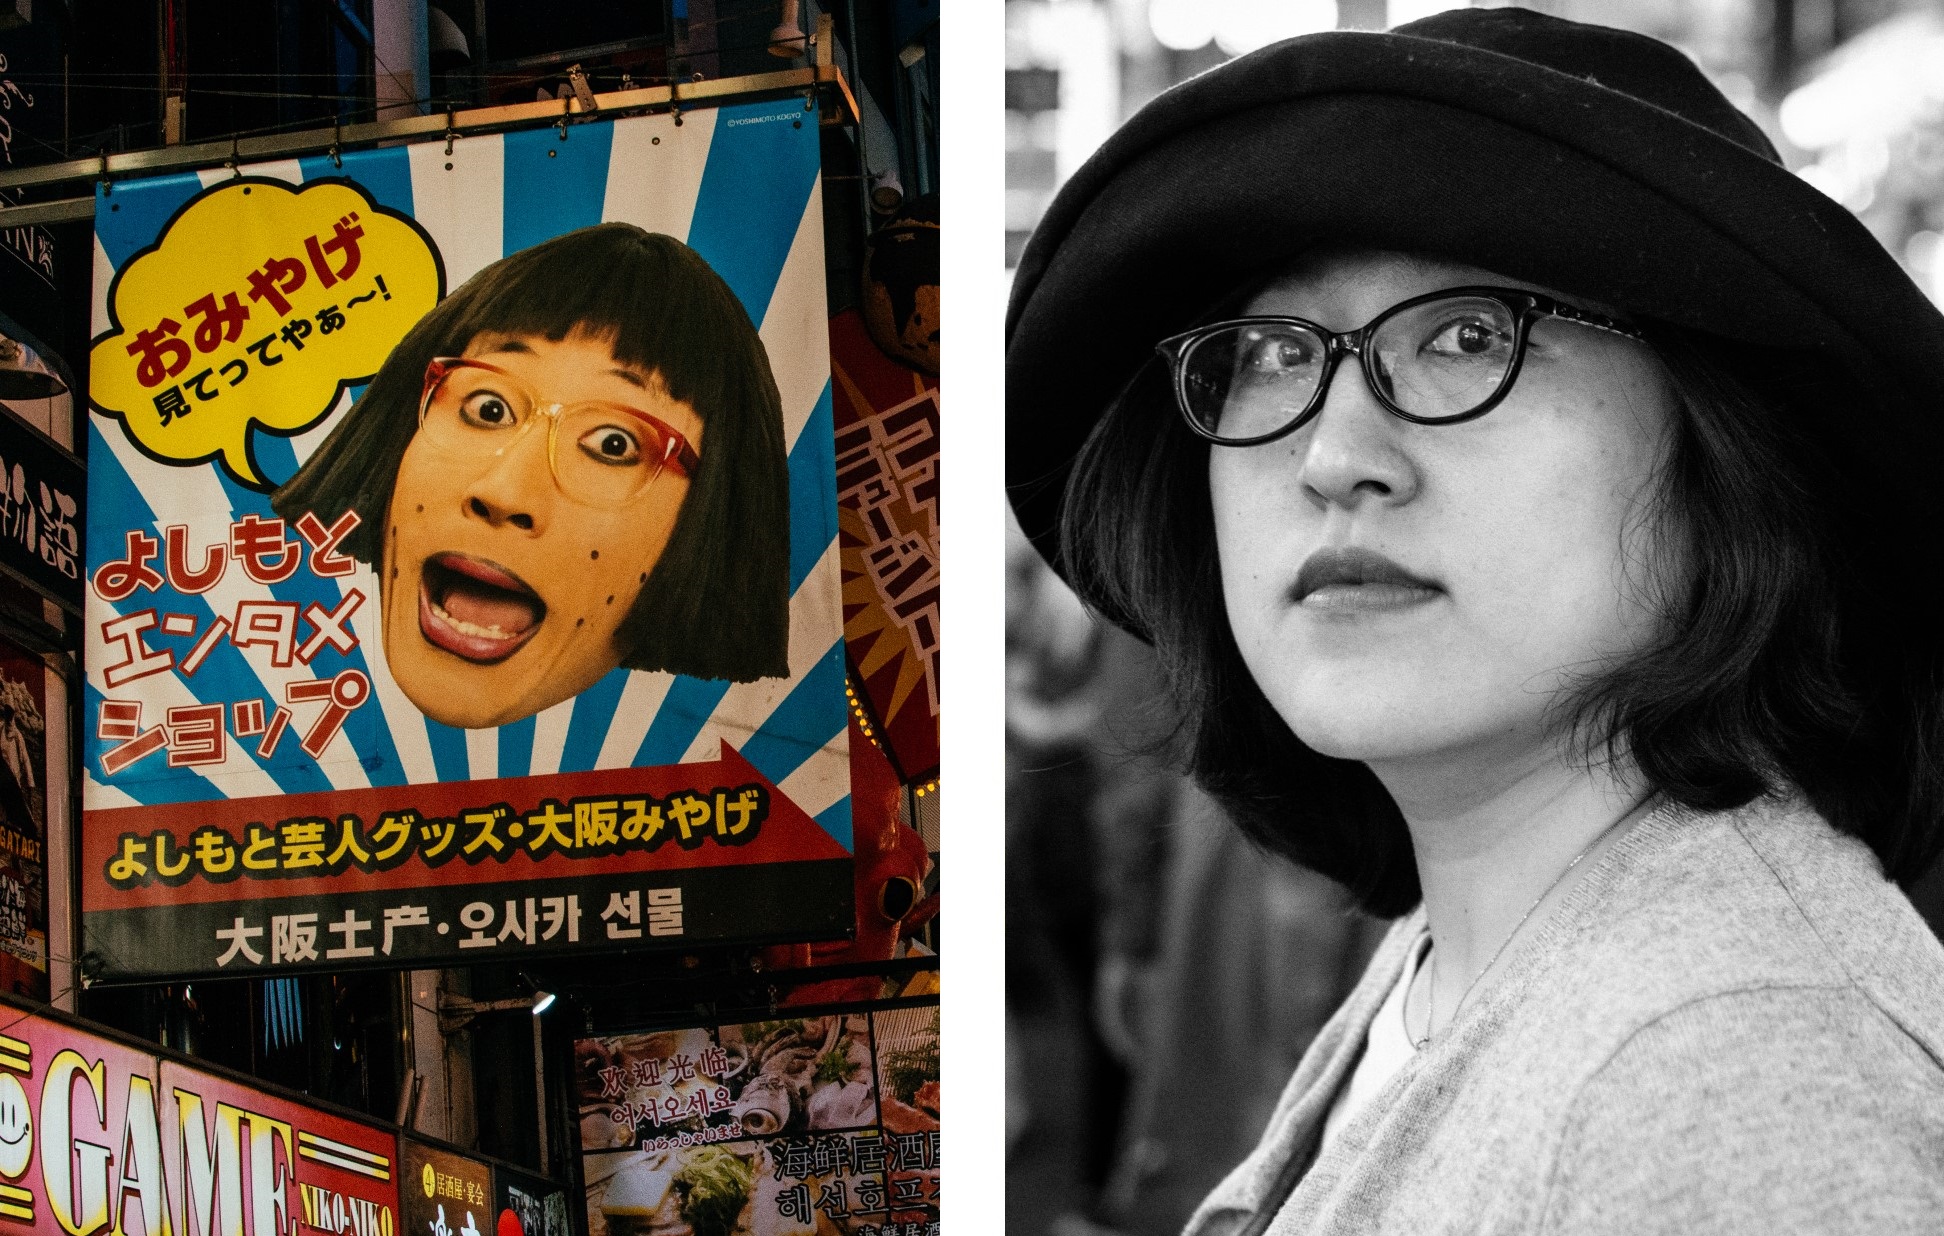 Left, sign showing advertisement. Right, woman in street.